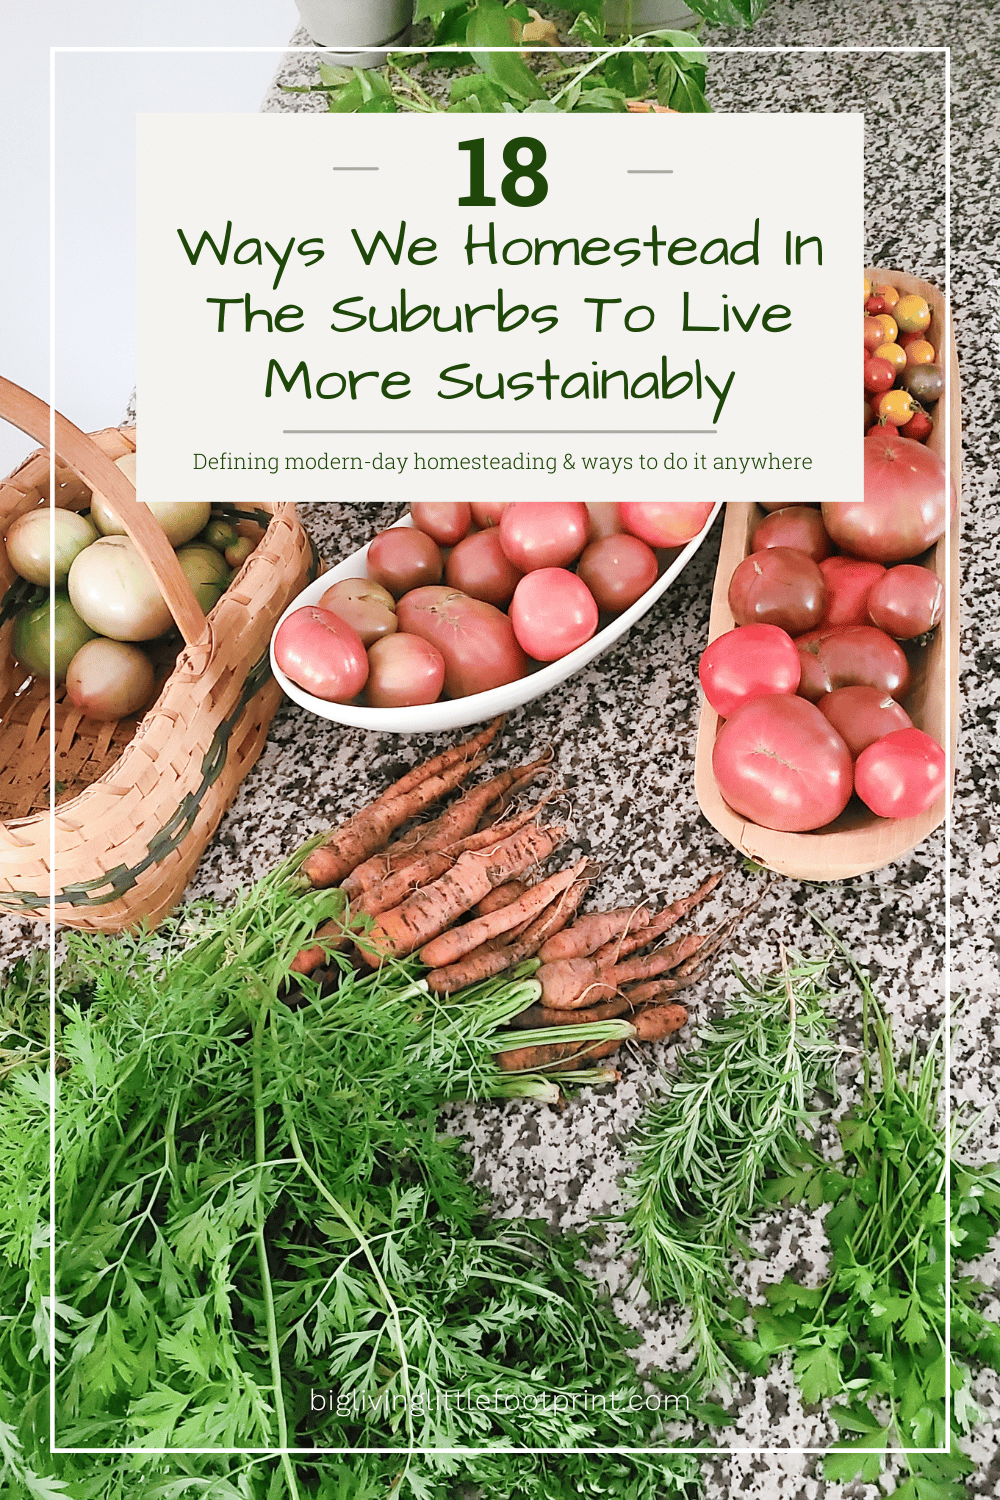 18 Ways We Homestead In The Suburbs To Live More Sustainably